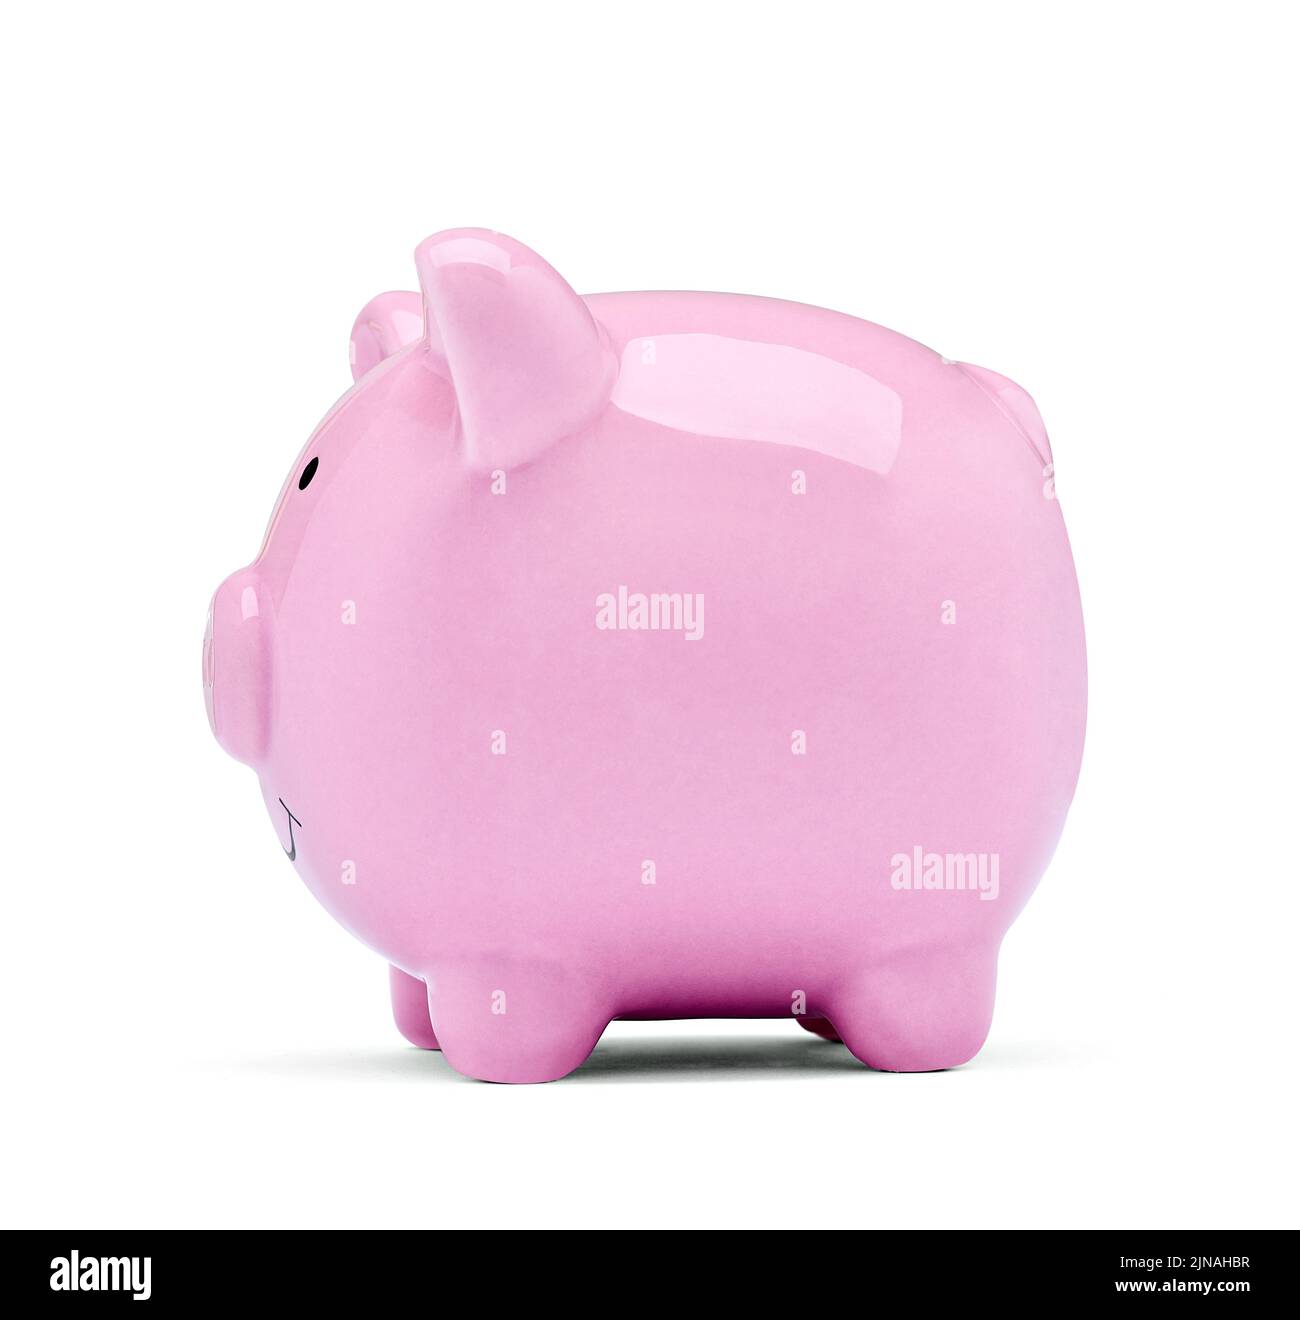 Close up of a pink piggy bank on white background Stock Photo